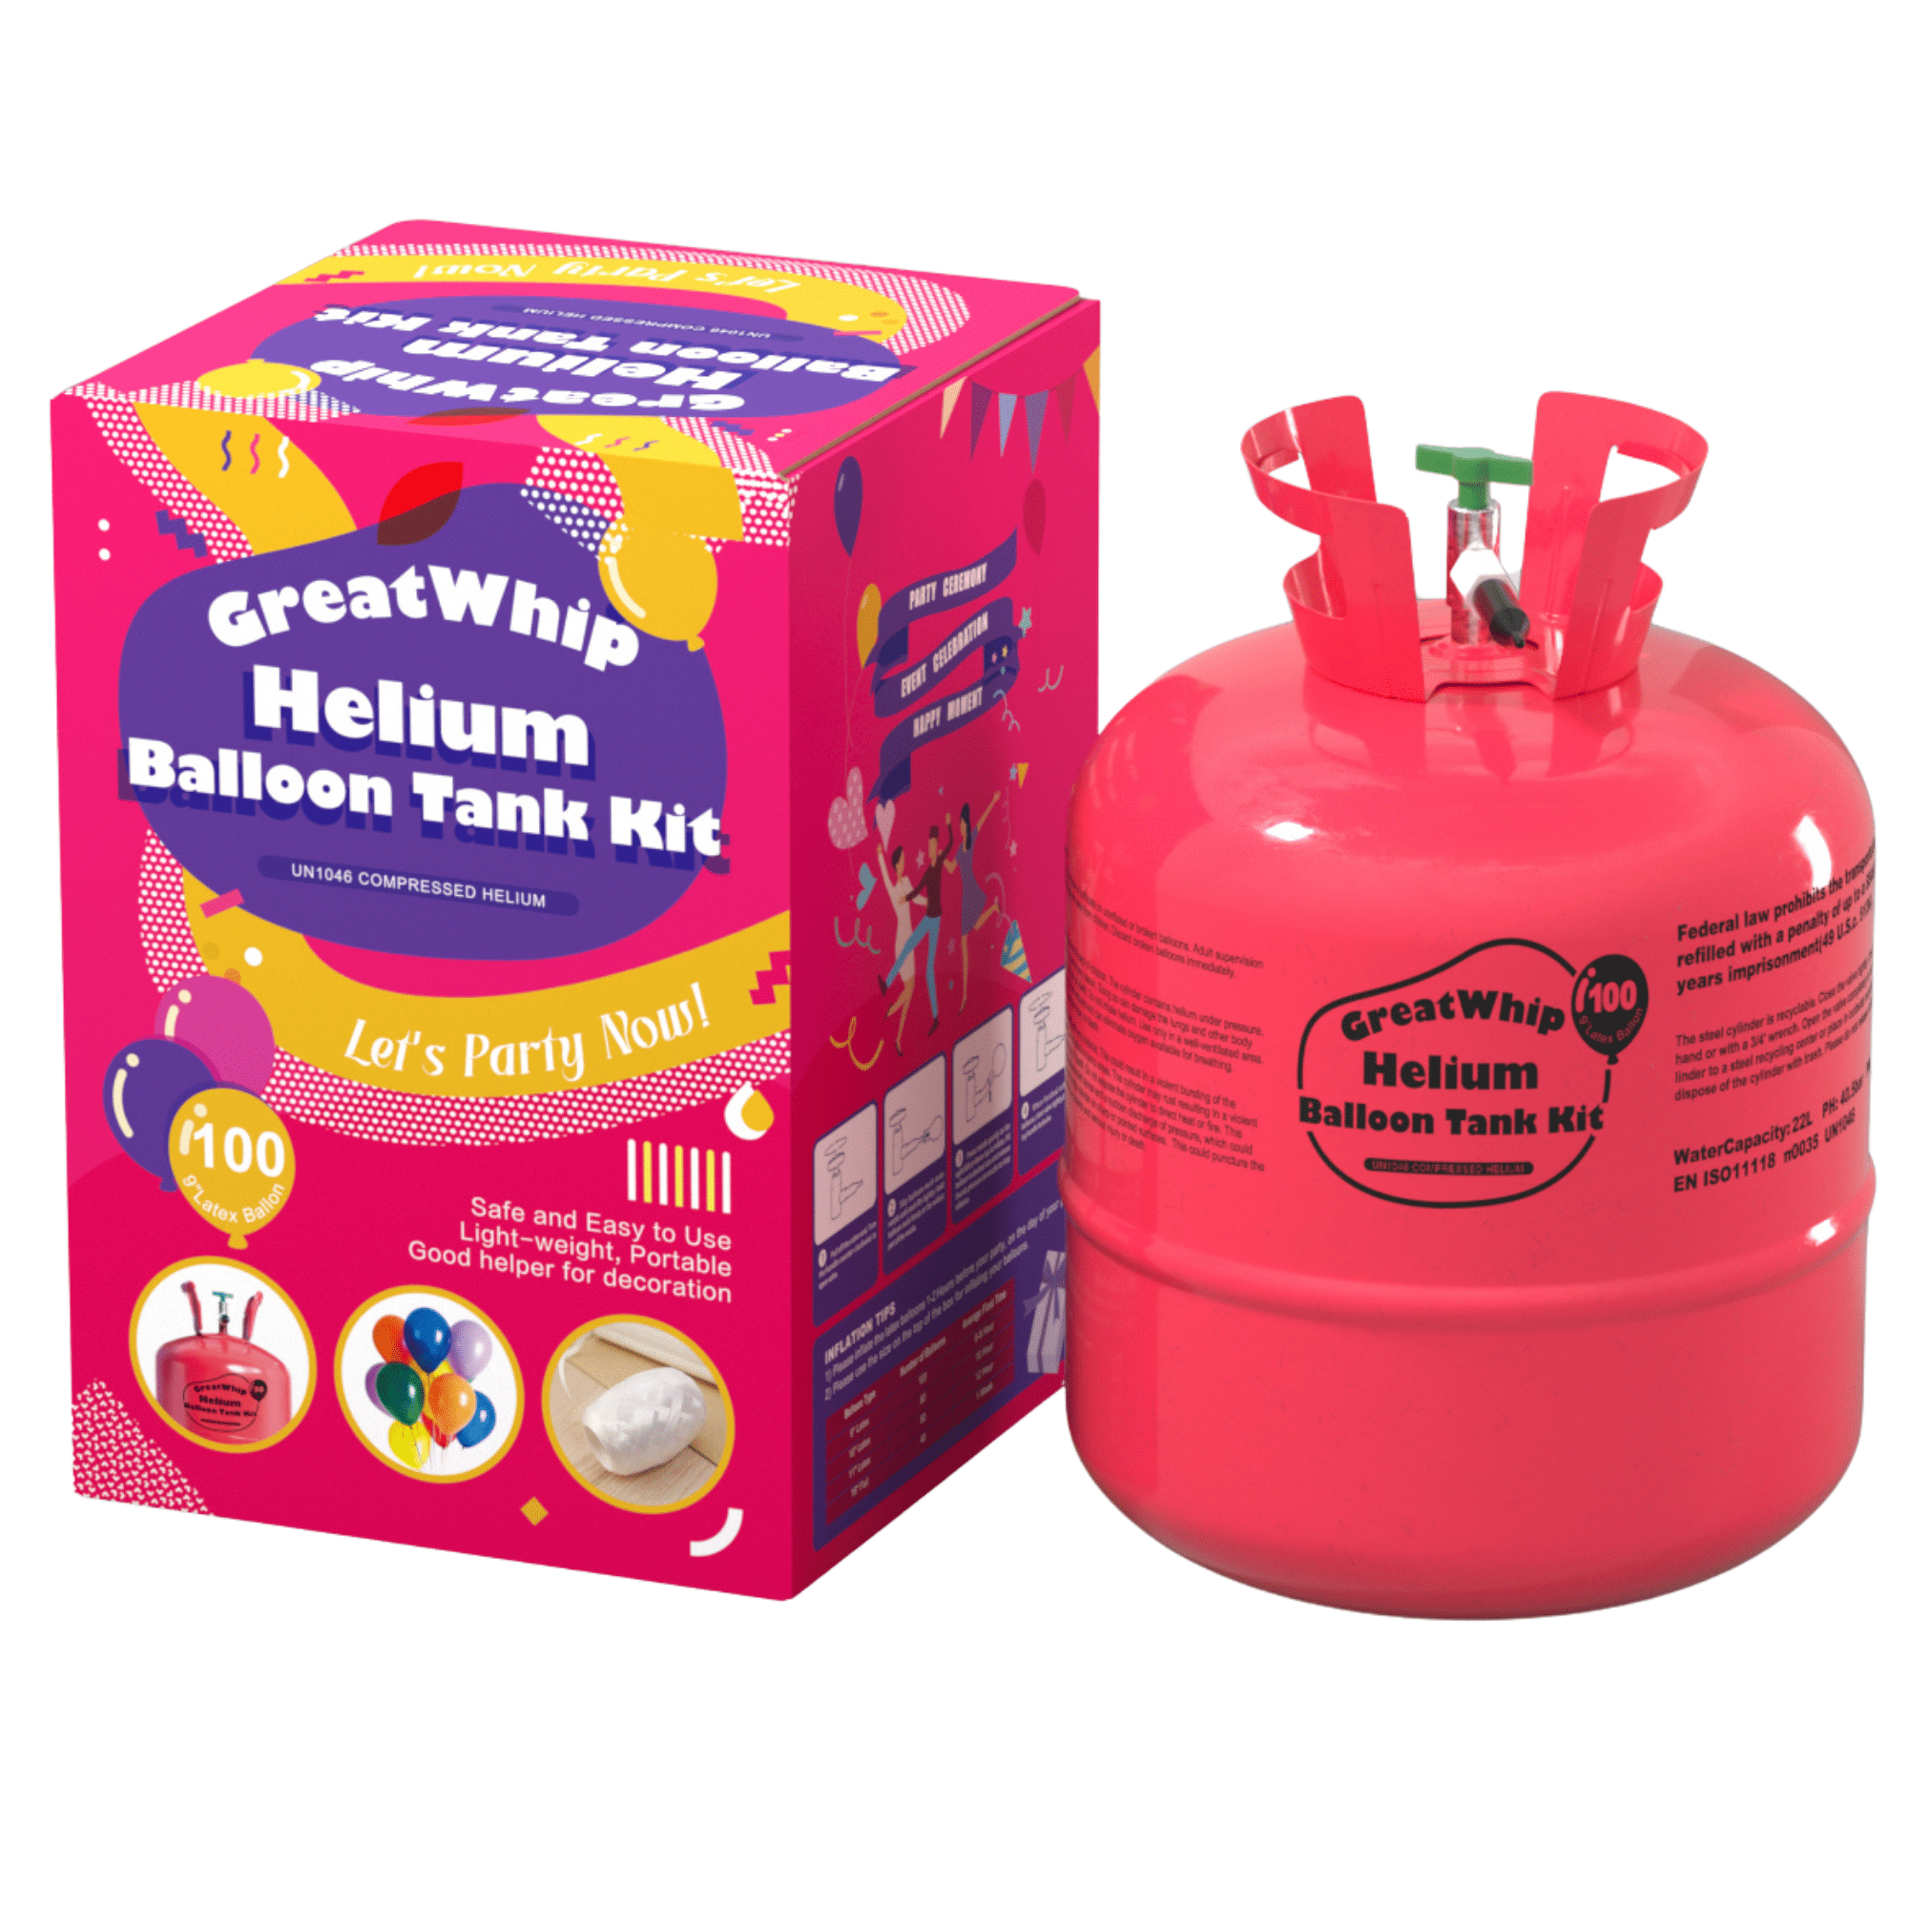 Helium Balloon Gas Cylinder Hire to inflate 100 balloons